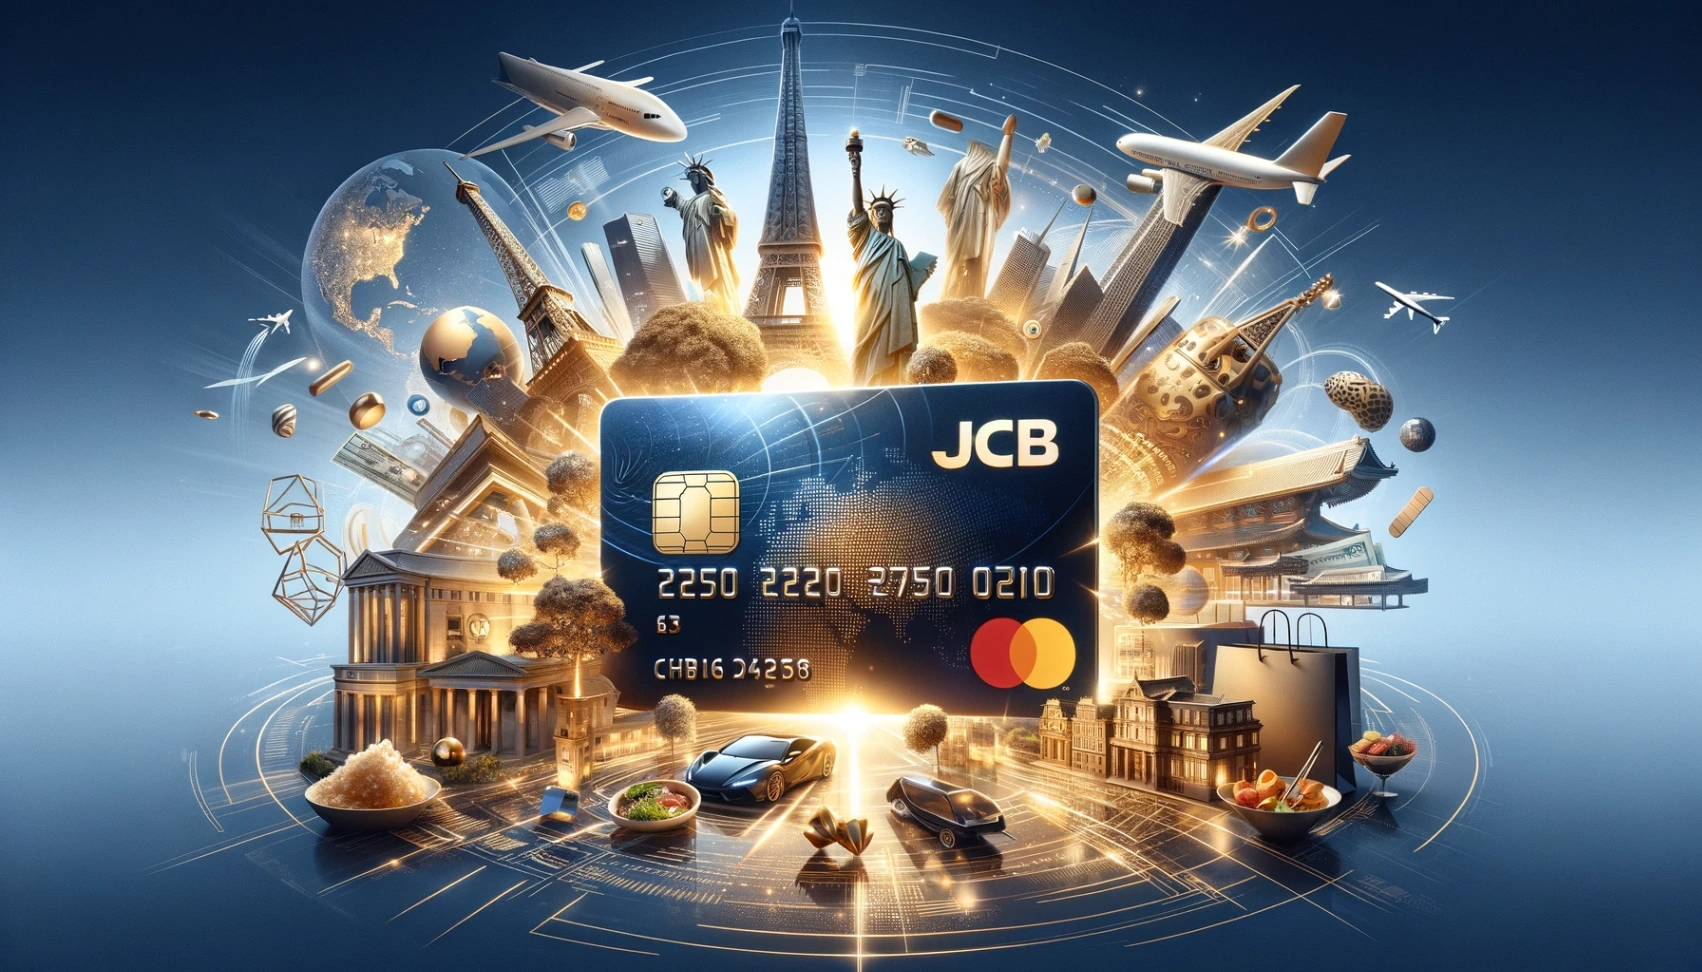 JCB Credit Cards - Learn How to Apply Online